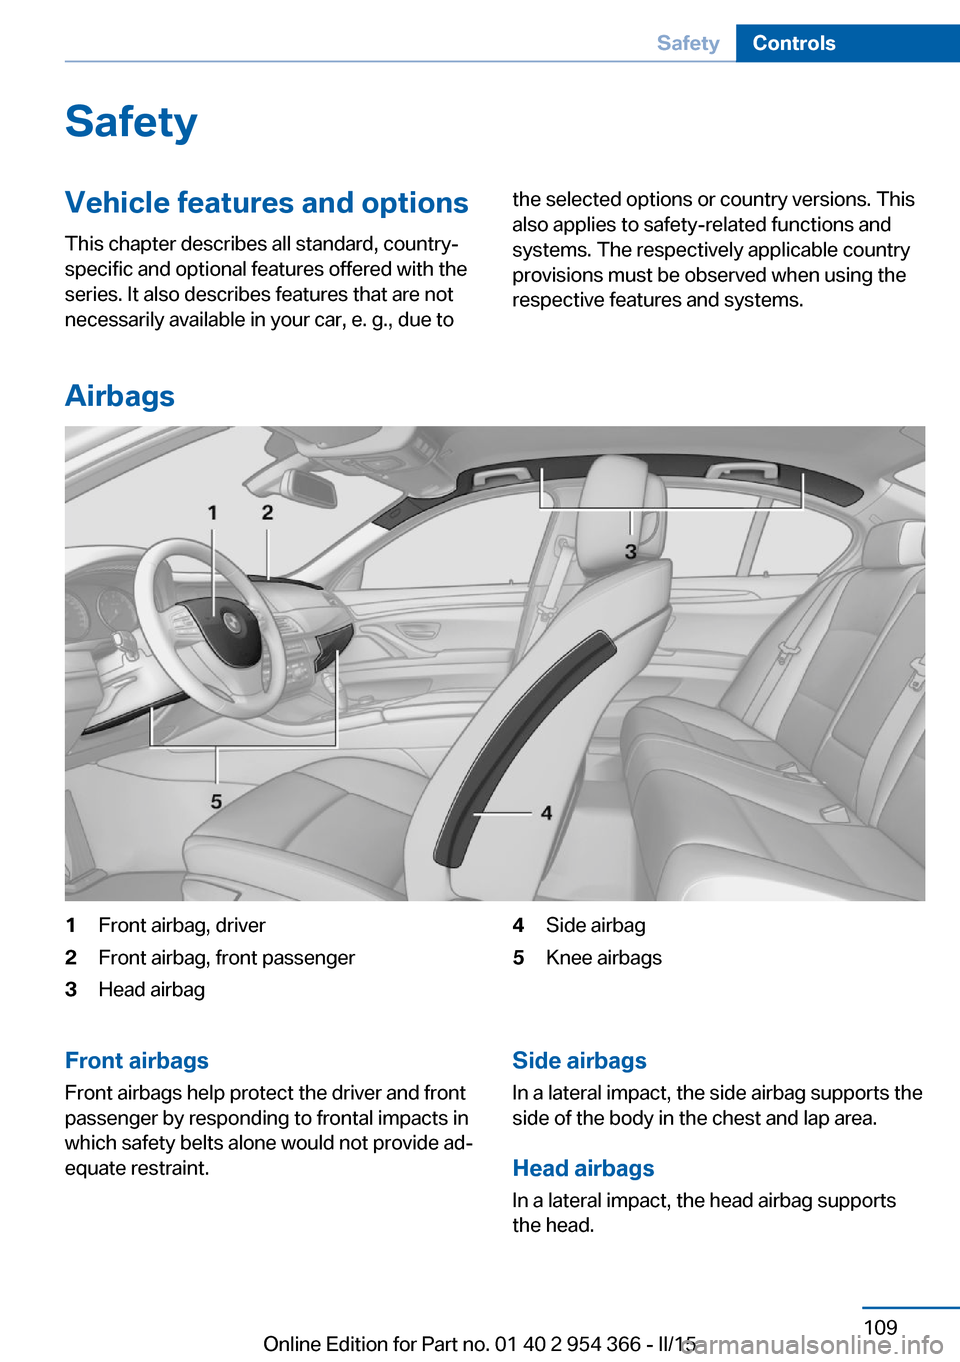 BMW ACTIVE HYBRID 5 2015 F10H Owners Manual SafetyVehicle features and options
This chapter describes all standard, country-
specific and optional features offered with the
series. It also describes features that are not
necessarily available i